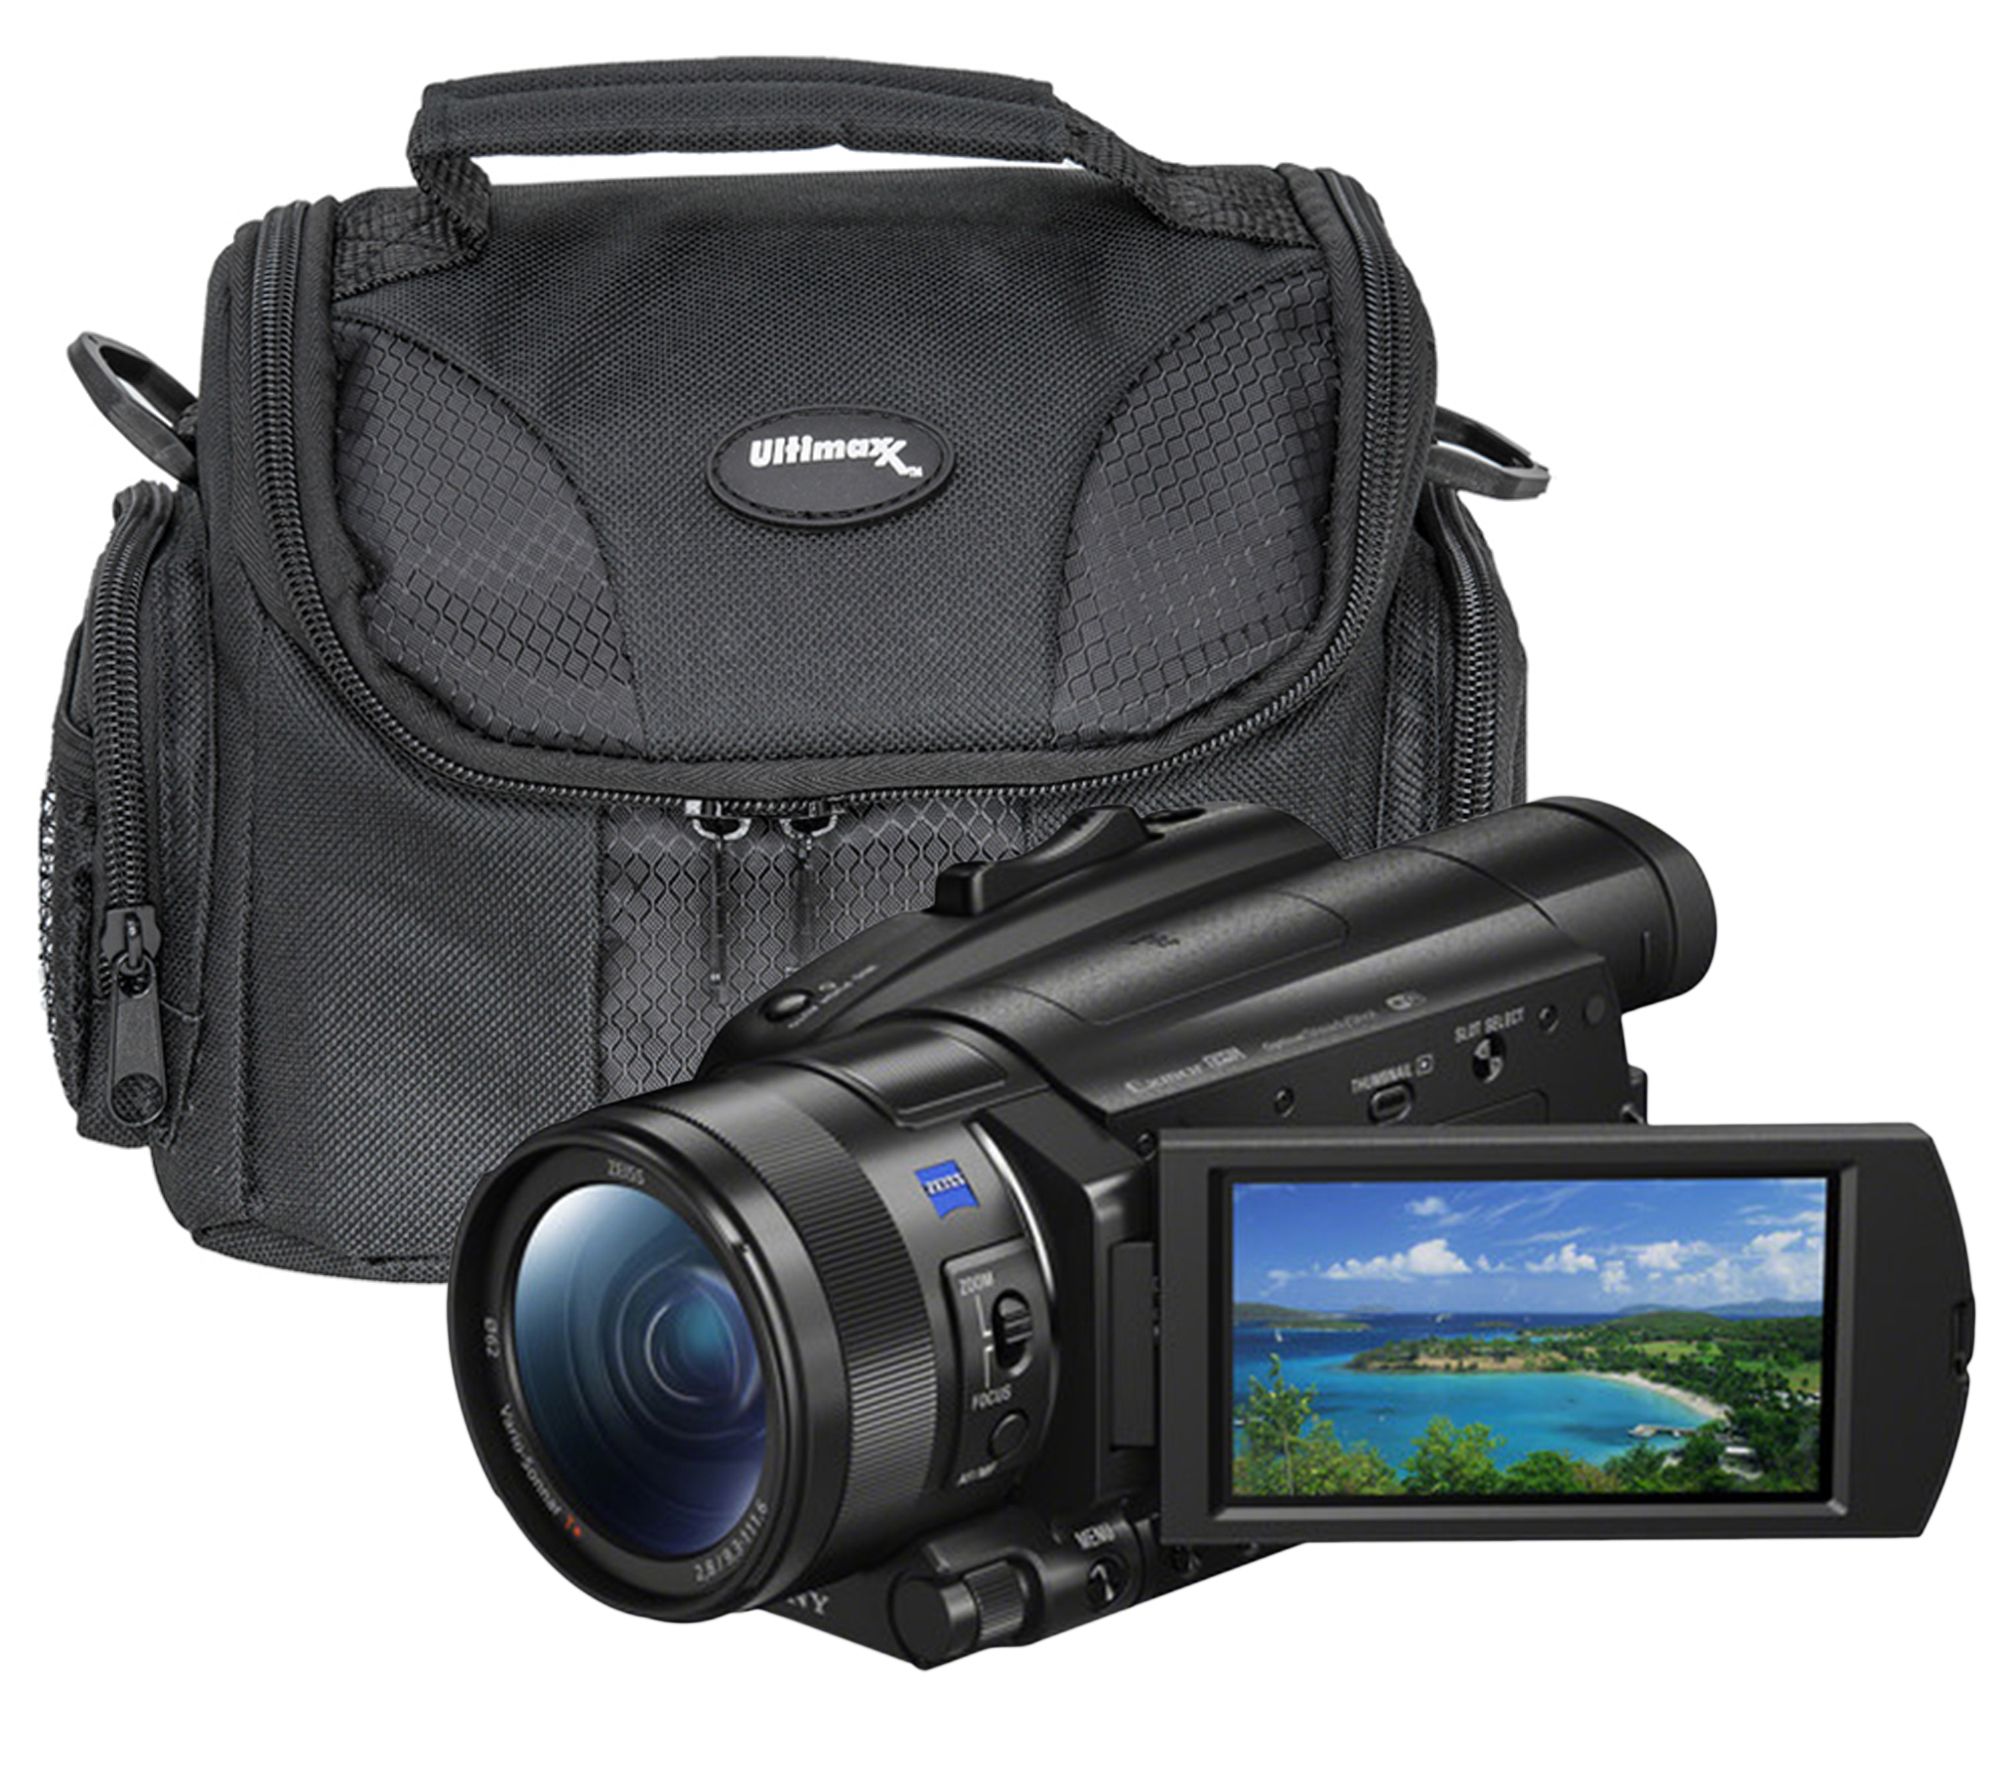 Email hobby evne Sony FDR-AX700 4K Camcorder w/ Carry Case - QVC.com